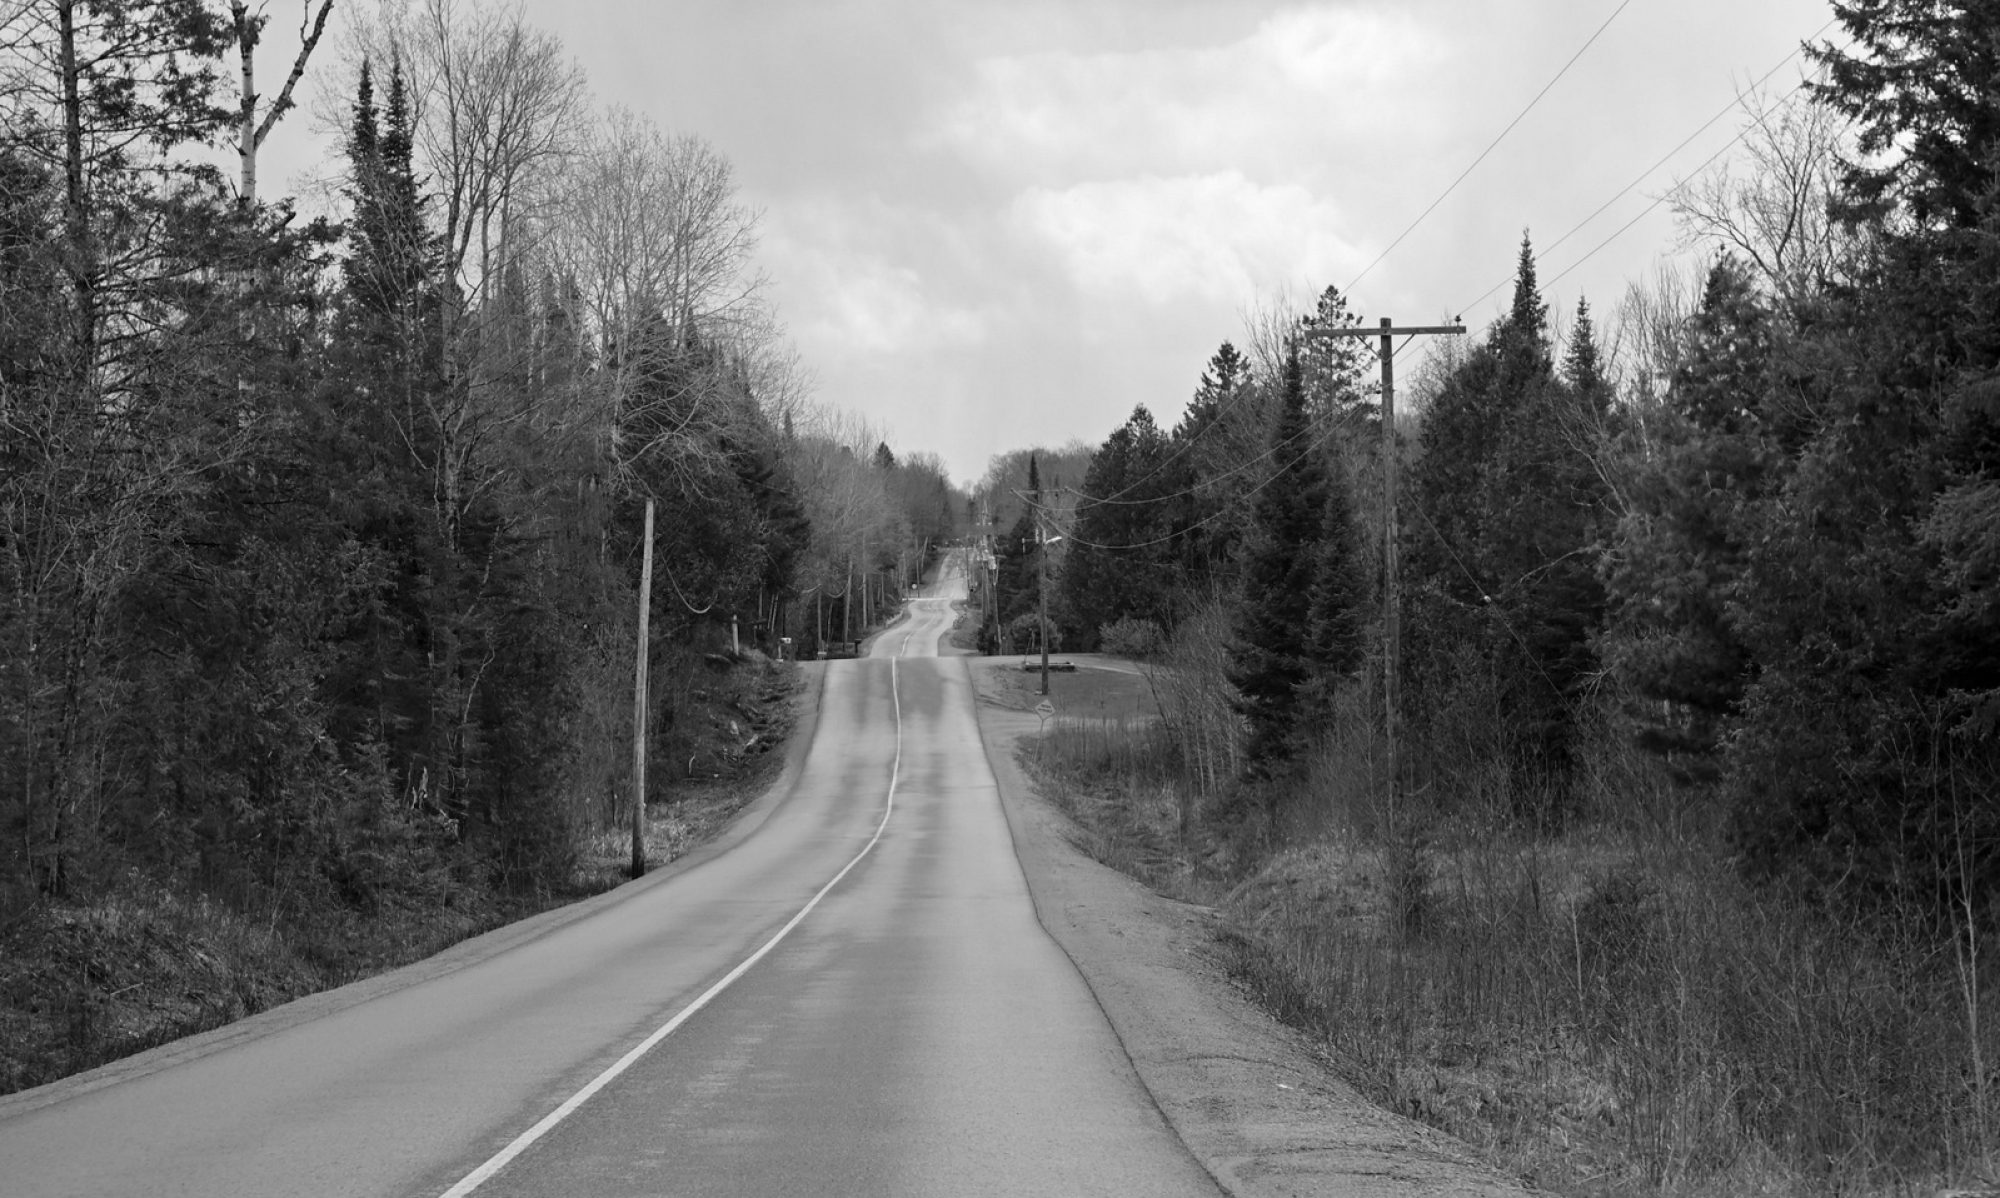 The image depicts a winding road stretching into the distance, flanked by trees on either side. The road, which appears wet and slick, is shown in a black-and-white color scheme, highlighting the contrast between the dark trees and the lighter road surface. Telephone poles and power lines run alongside the road, which gently curves through a wooded area, creating a serene and slightly desolate atmosphere. The surrounding trees are a mix of evergreens and deciduous trees, some of which have lost their leaves, suggesting late autumn or early spring. The sky is overcast, adding to the monochromatic and moody ambiance of the scene.